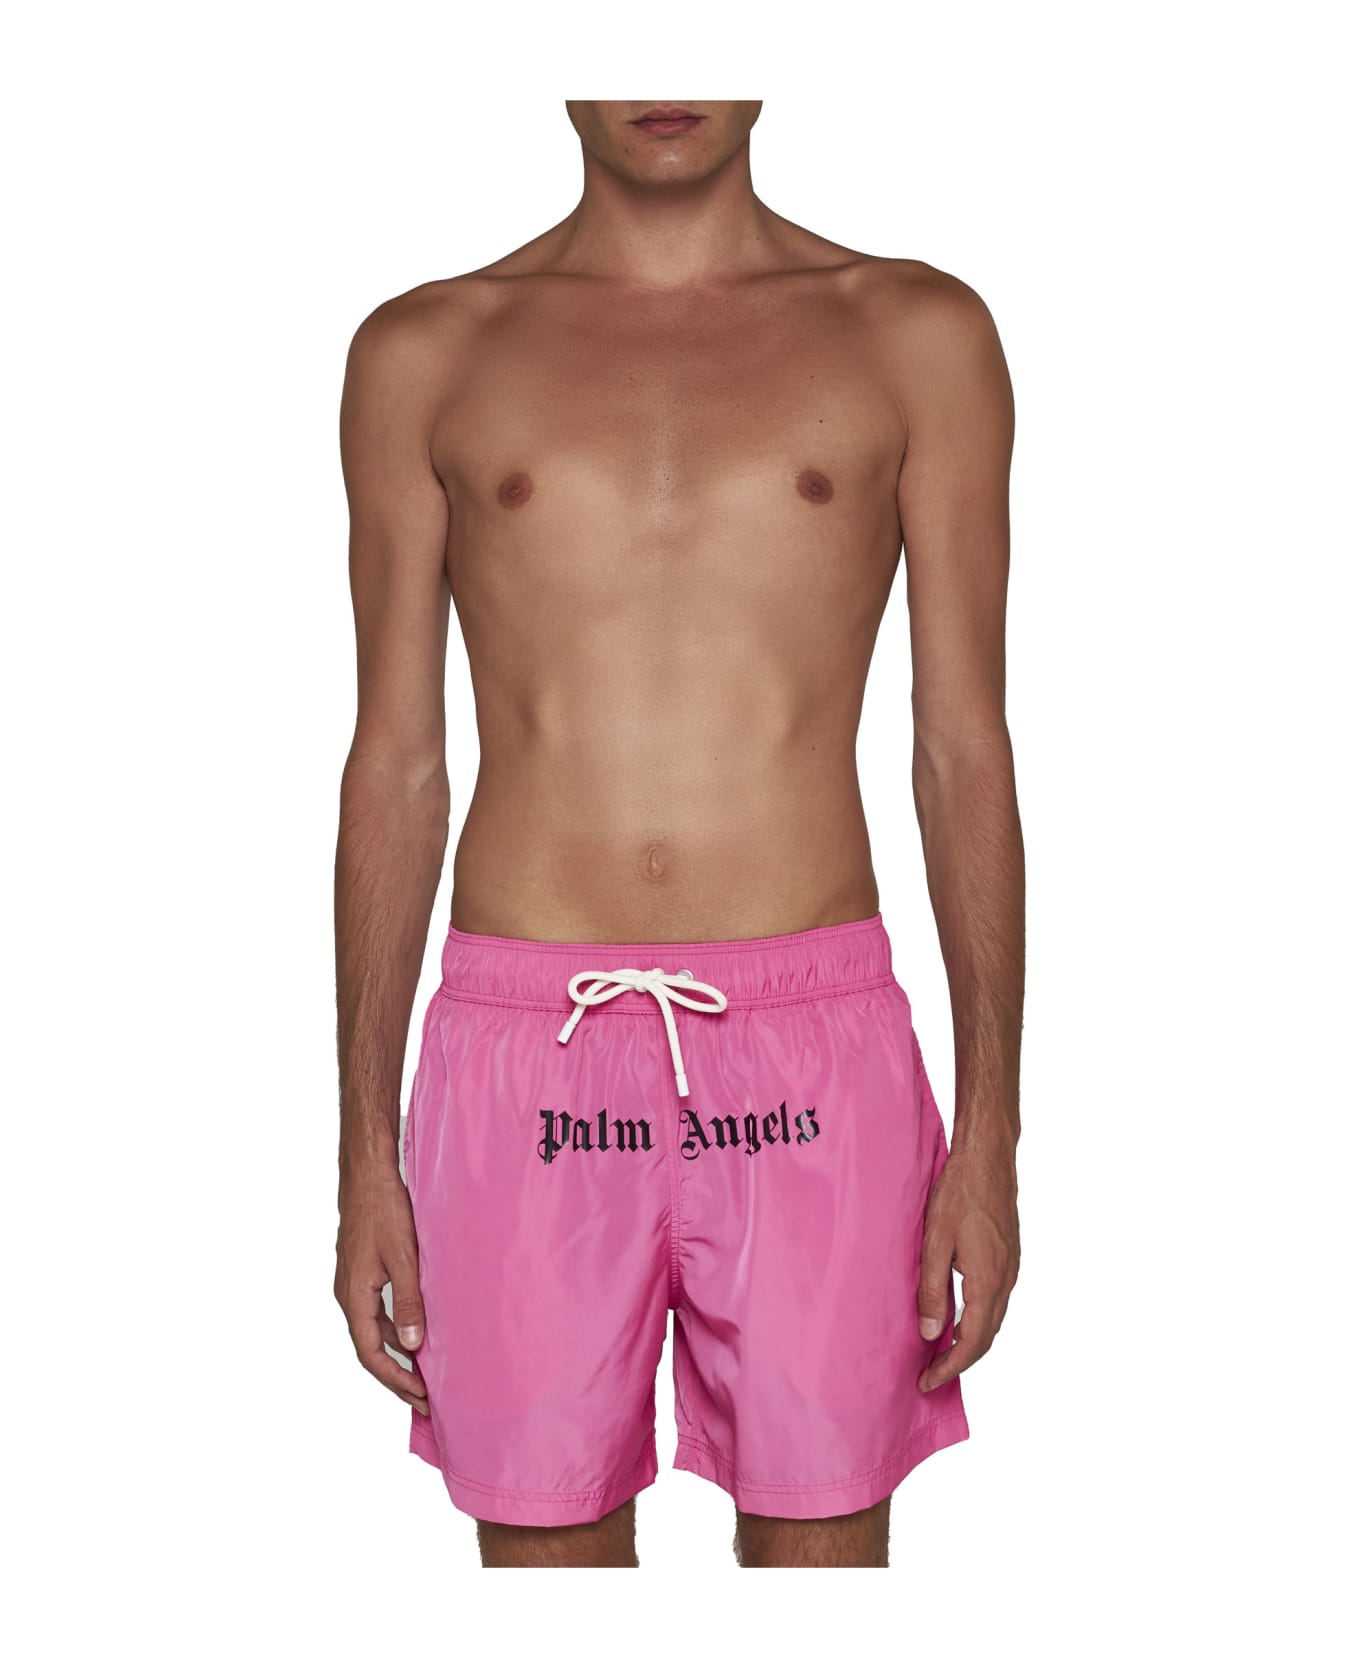 Palm Angels Swimsuit - Pink